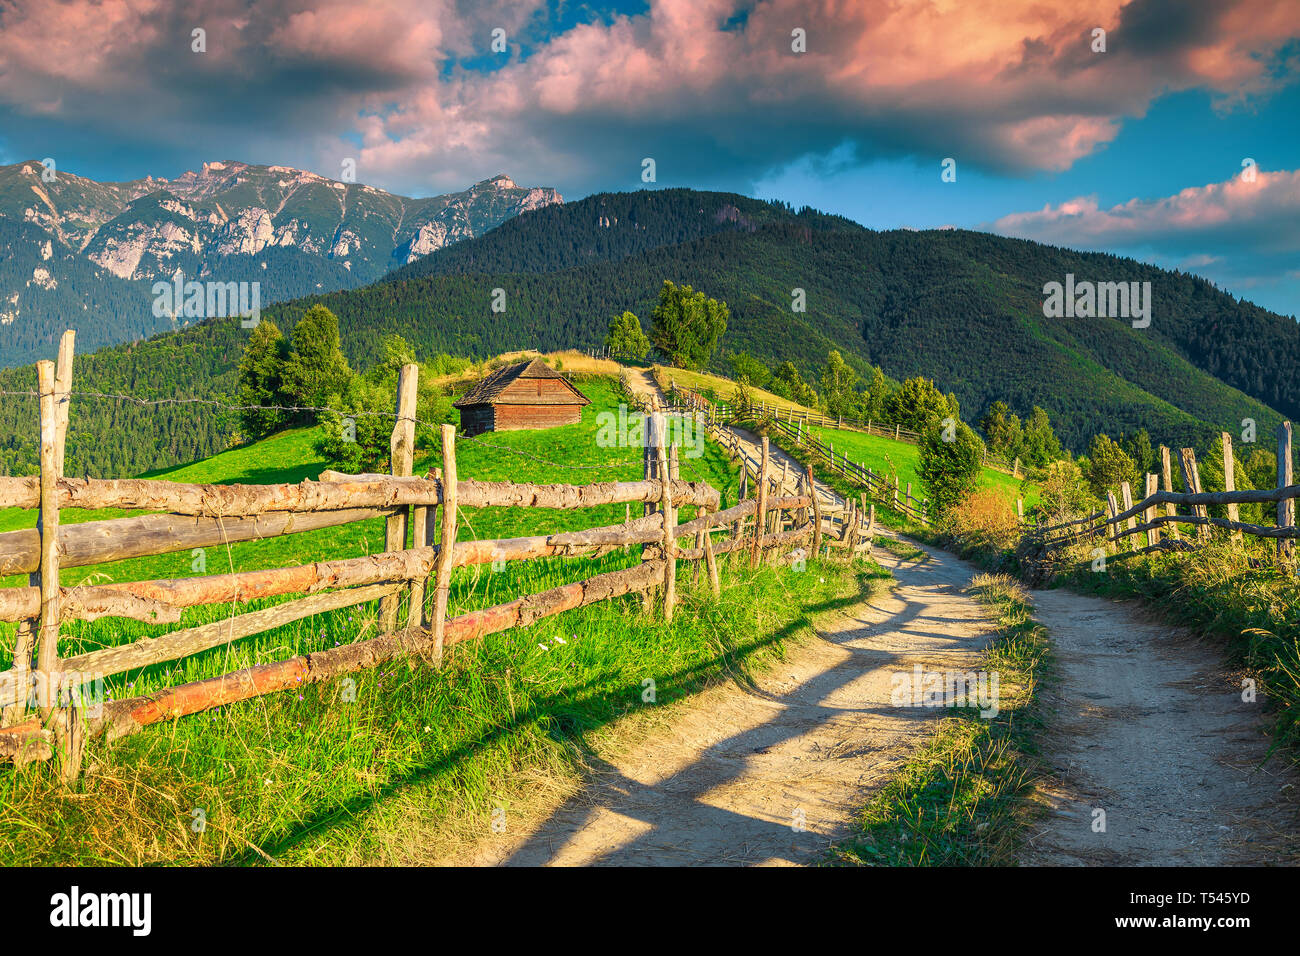 Spectacular summer alpine landscape with green fields,rural road and high mountains at sunset, Bran, Transylvania, Romania, Europe Stock Photo